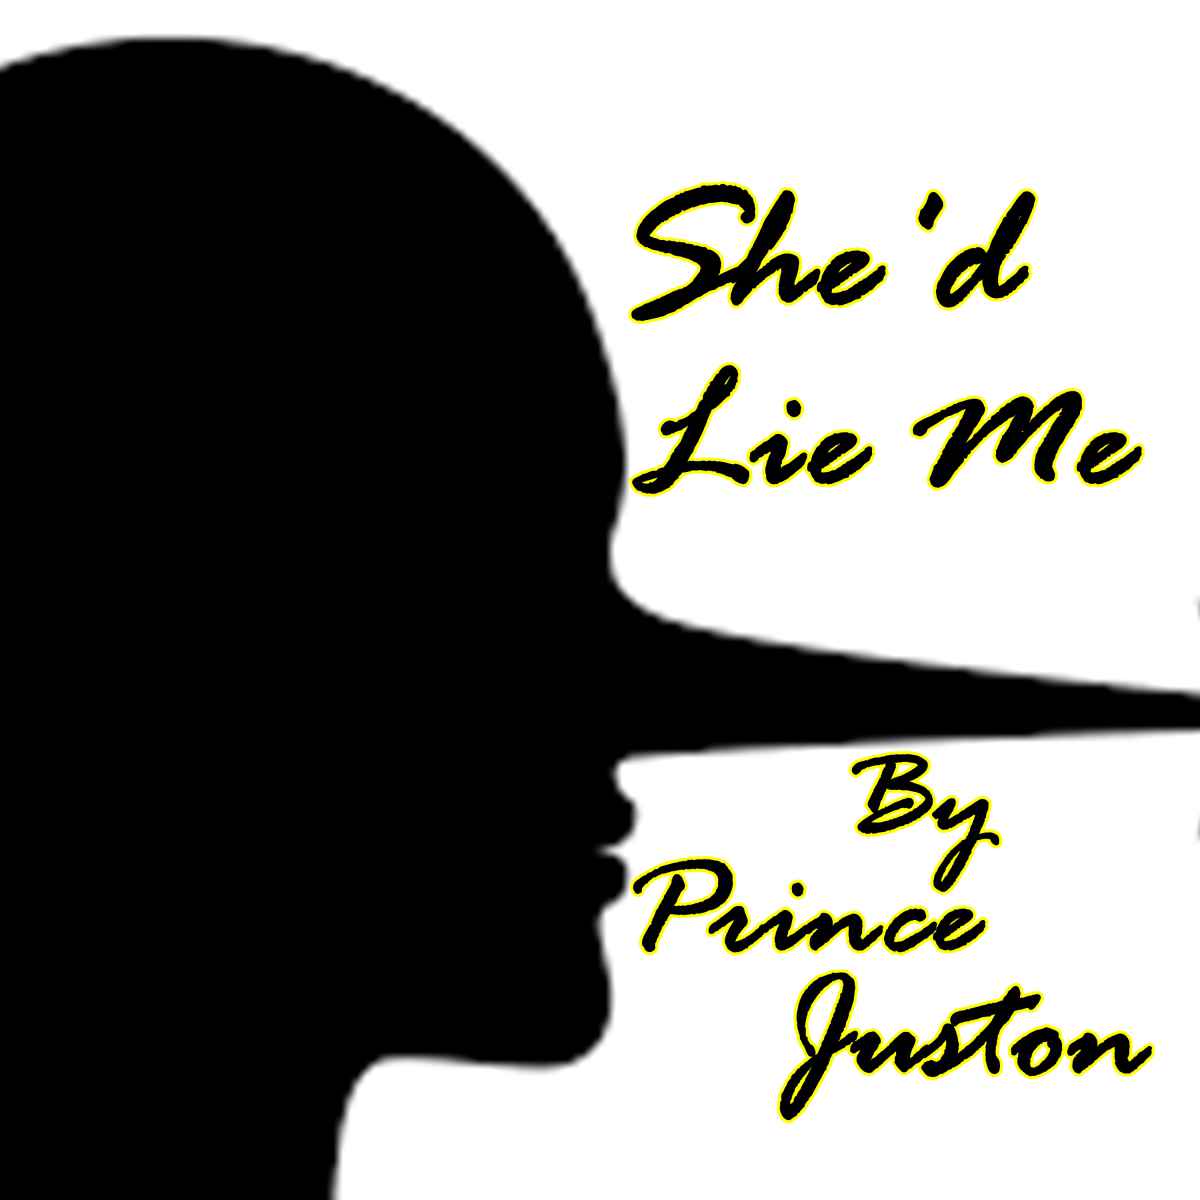 She'd Lie Me by Prince Juston